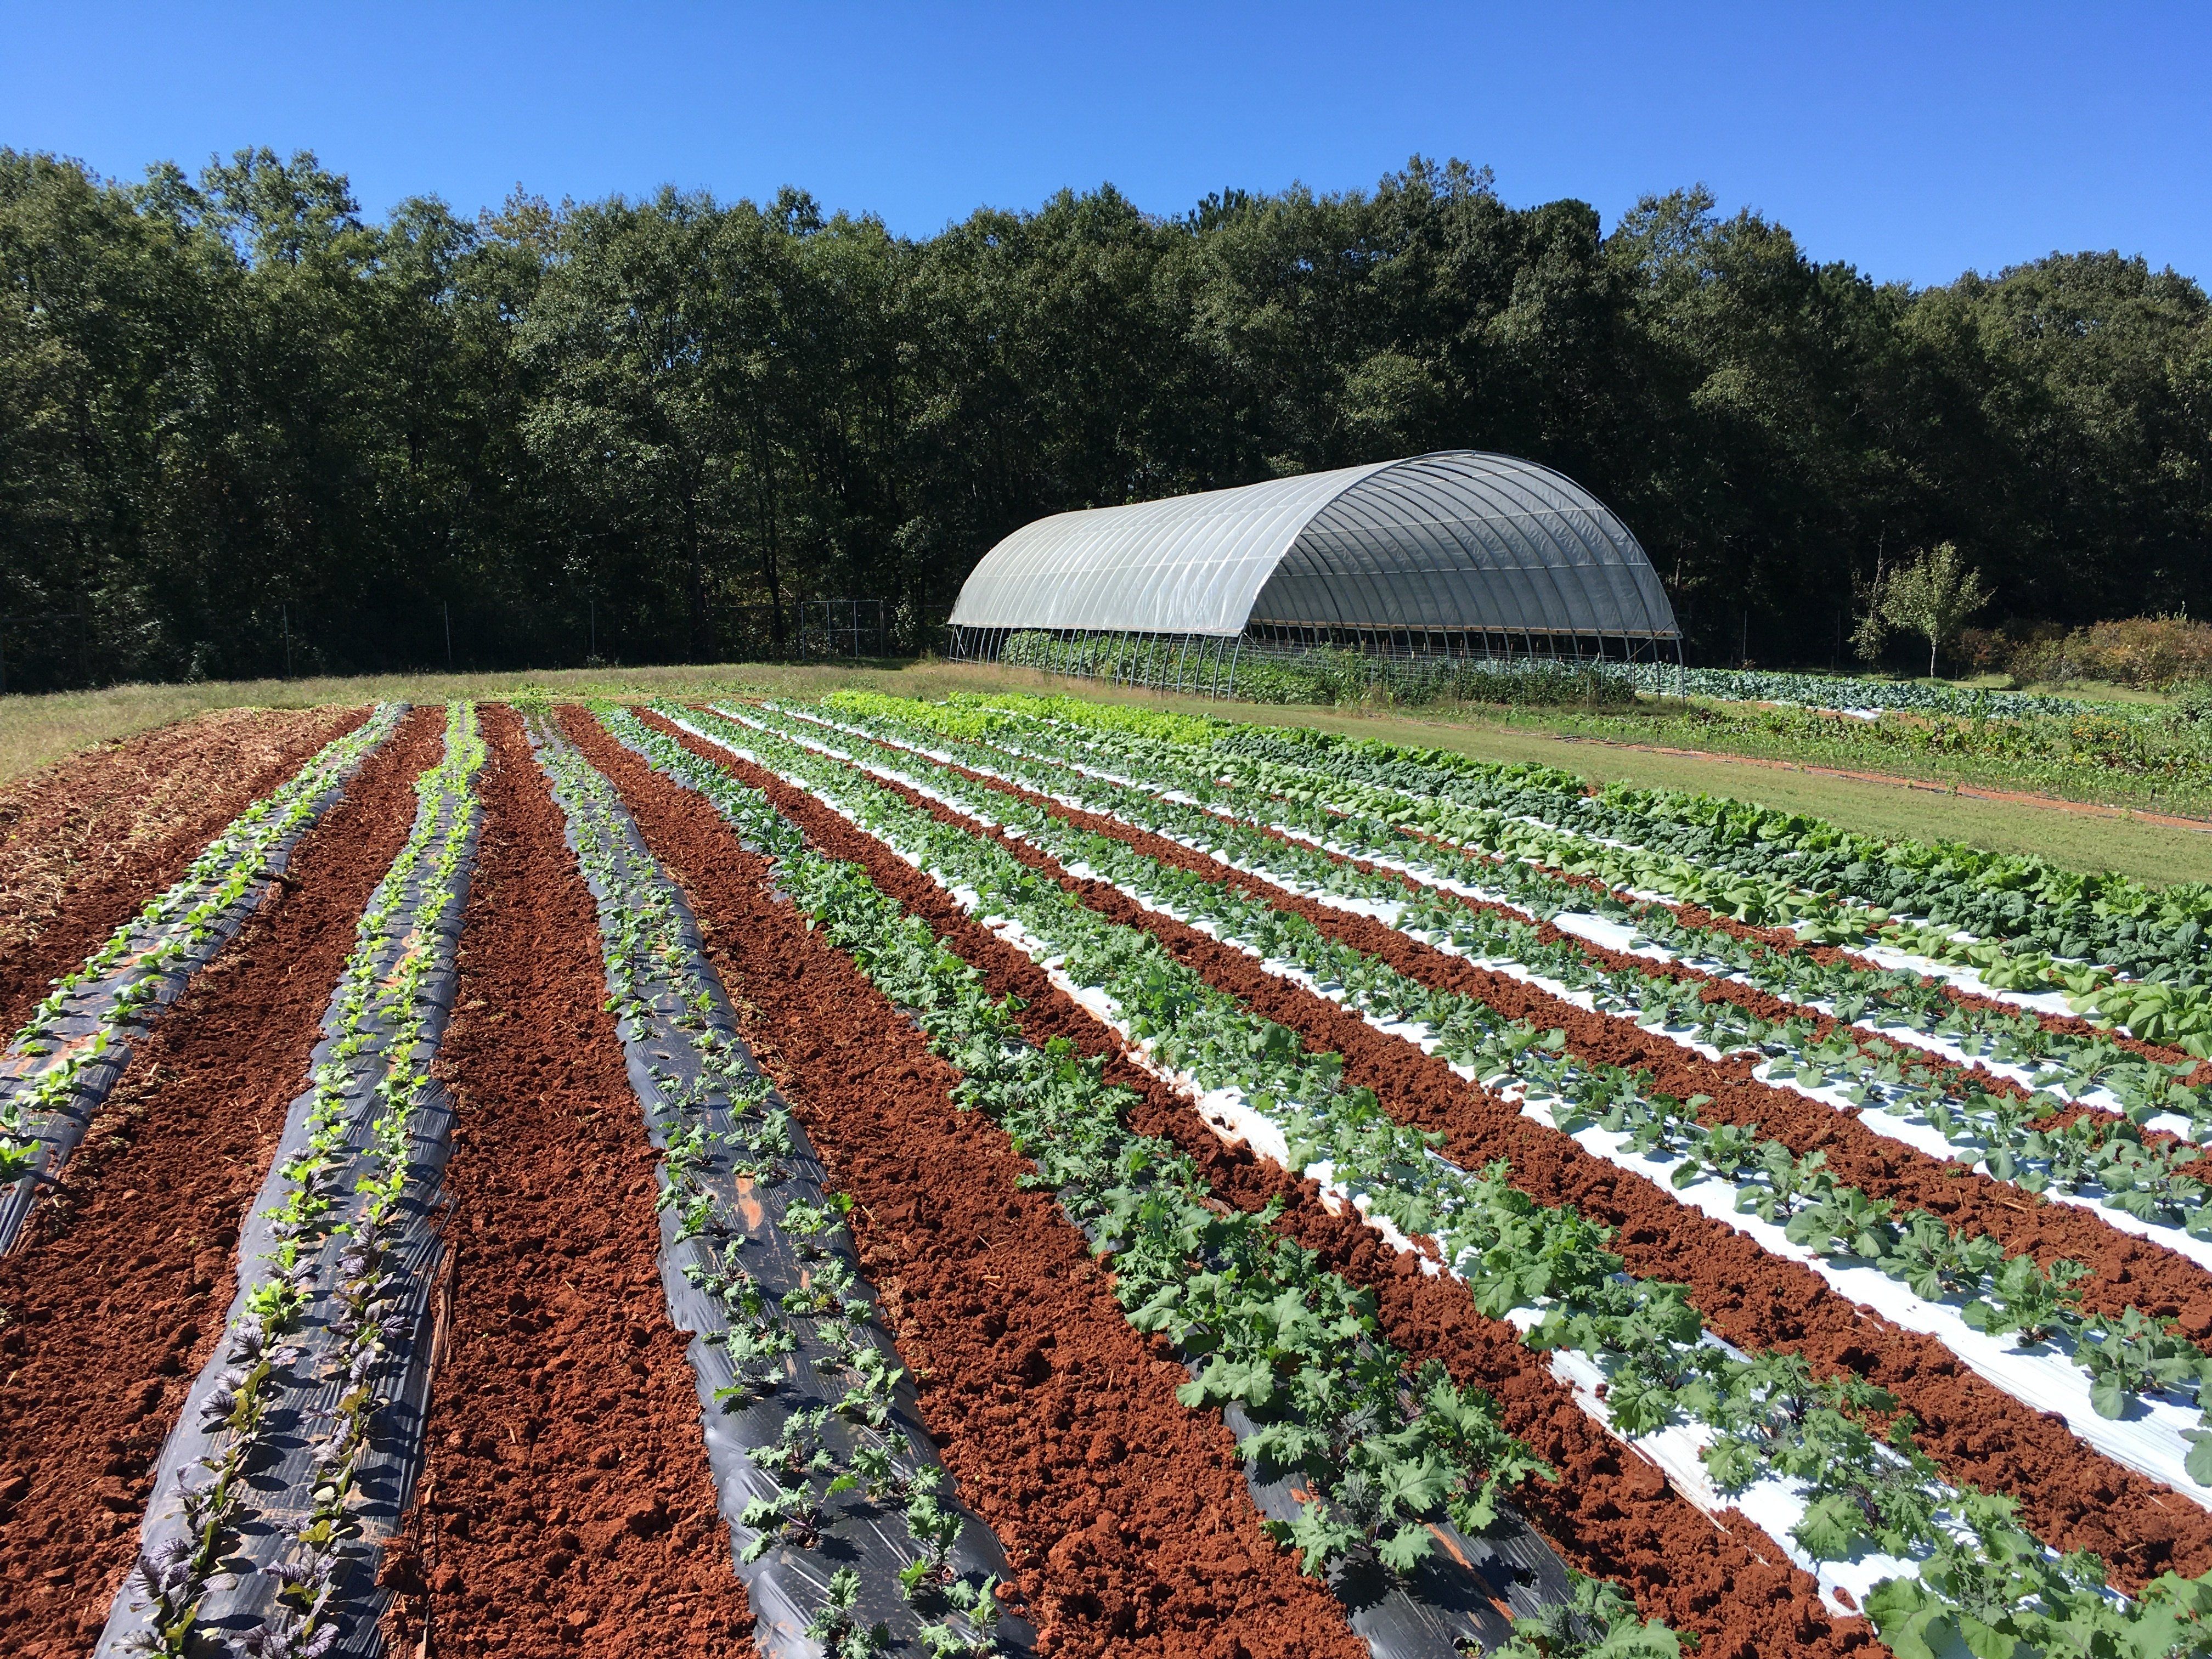 Previous Happening: Farm Happenings for October 2, 2020